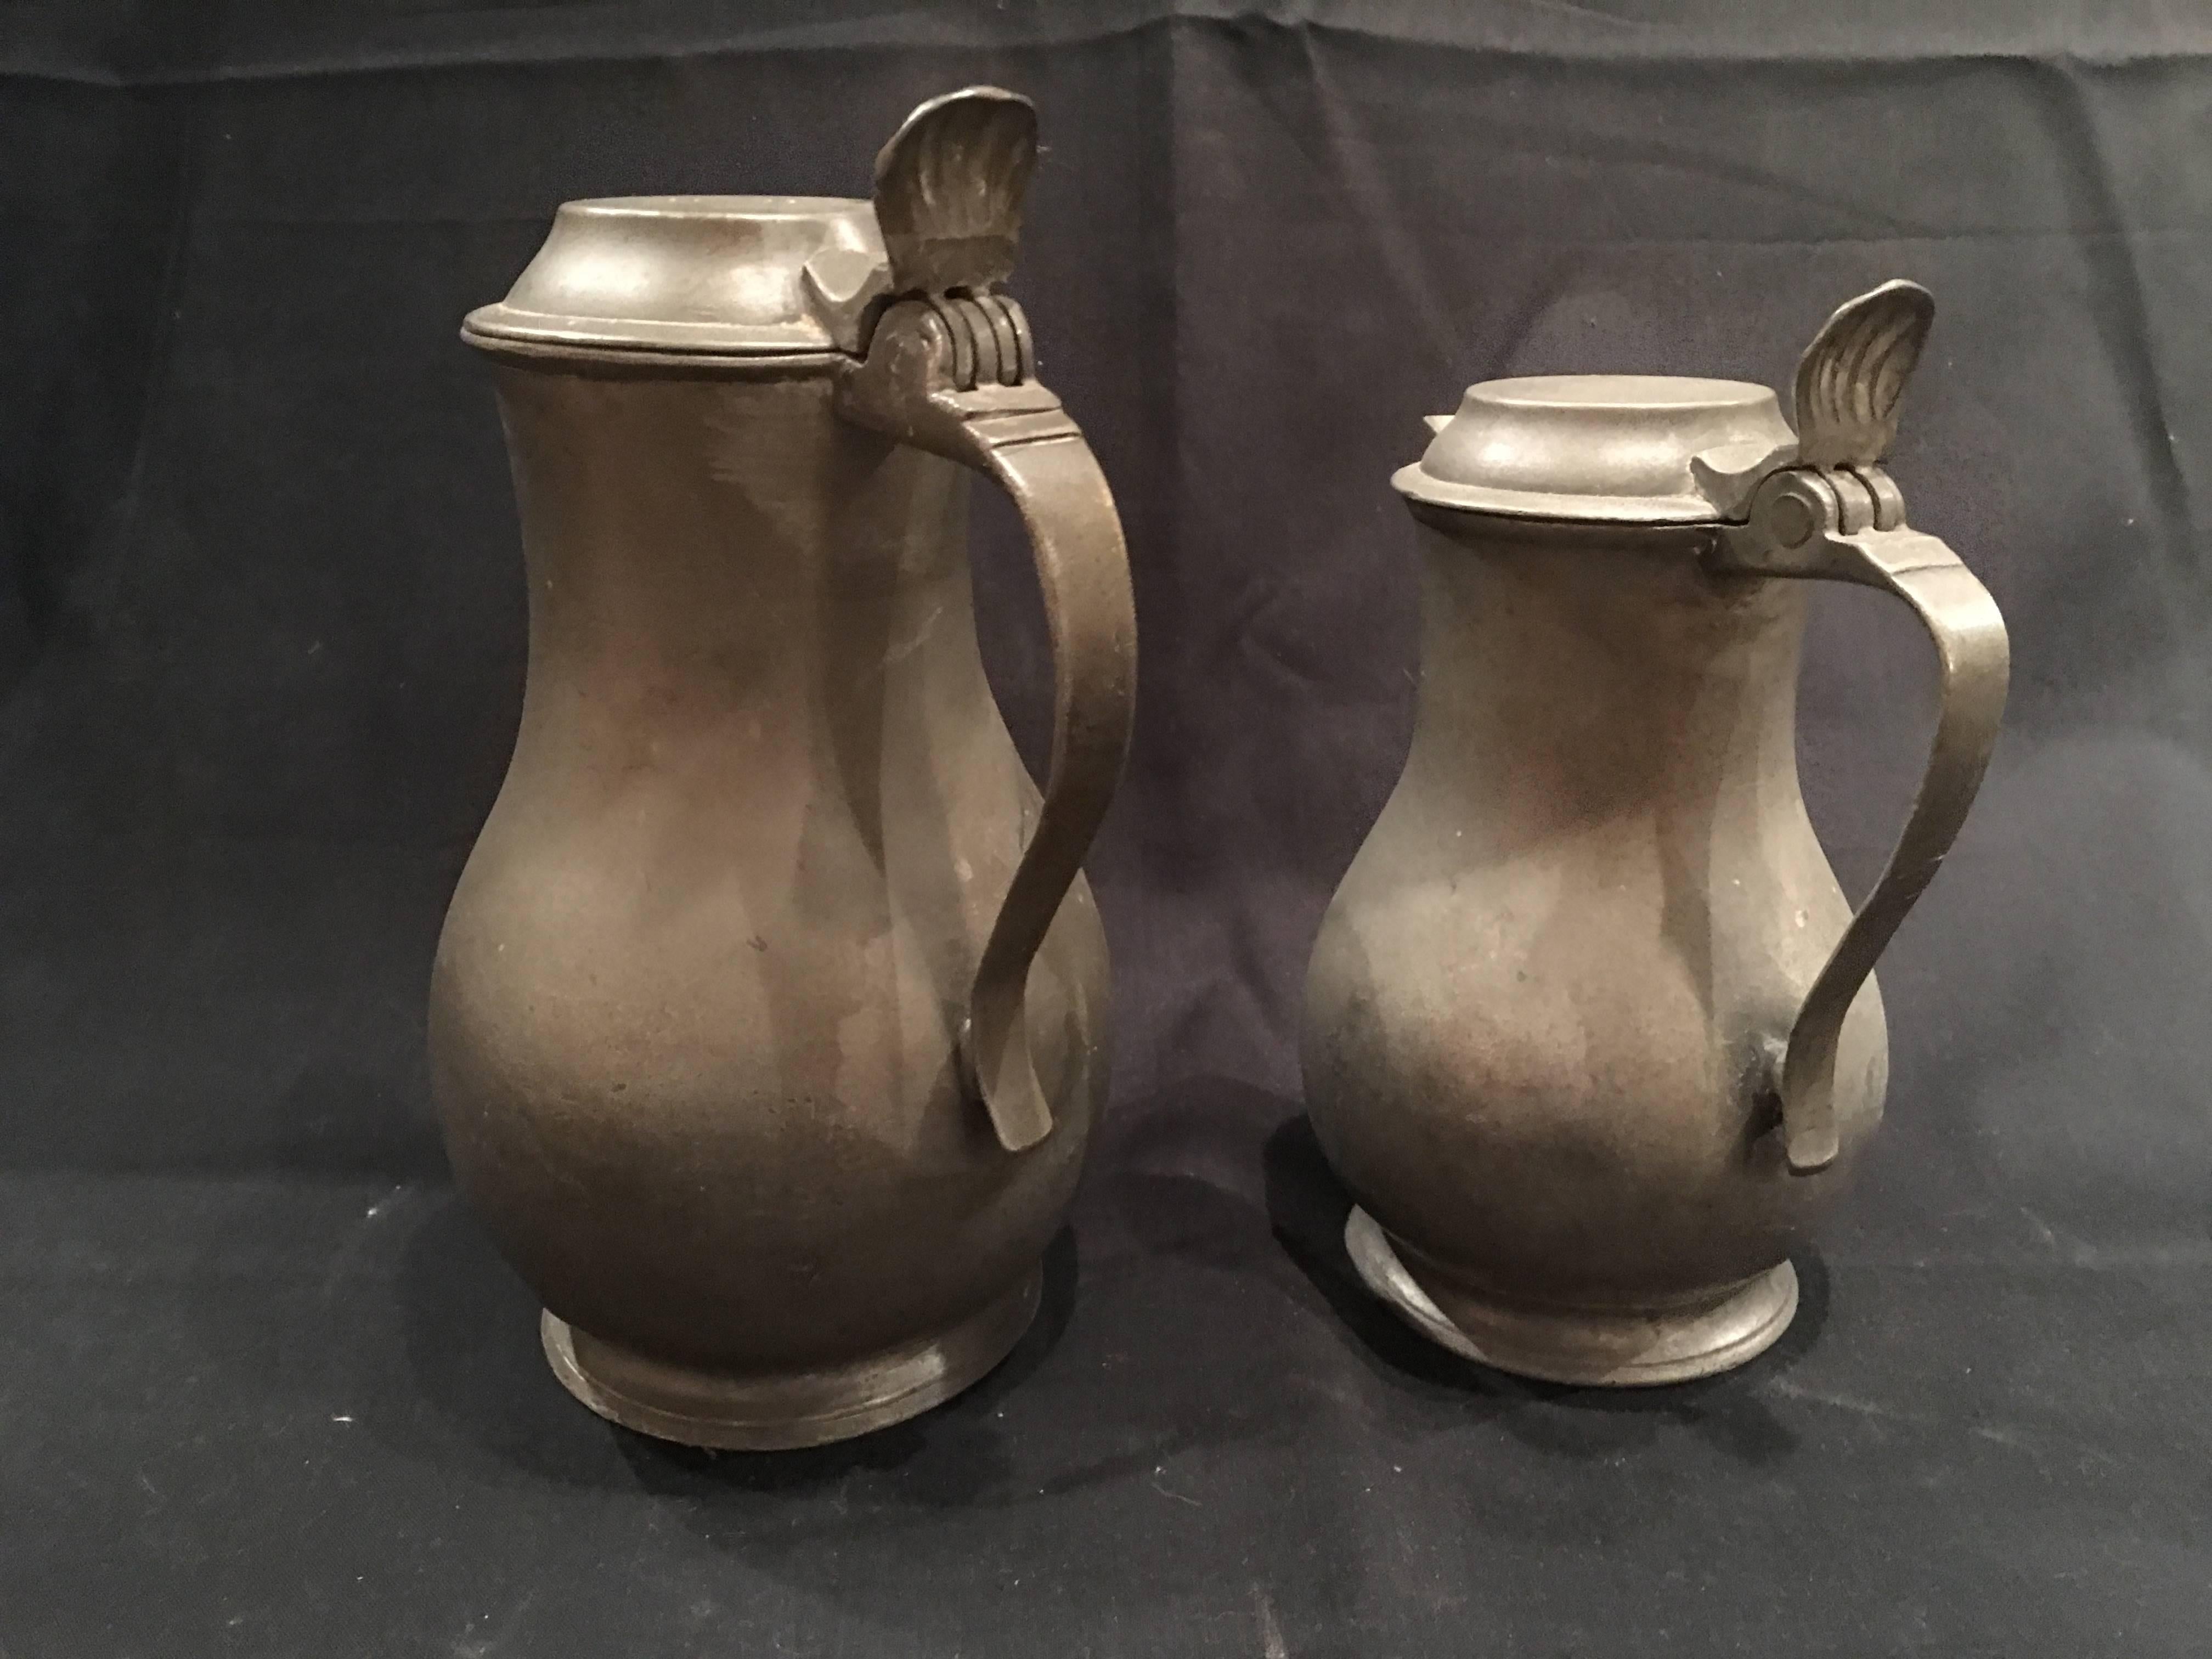 English Pair of Lidded Pewter Jugs or Tankards with Handles, 19th Century In Good Condition For Sale In Savannah, GA